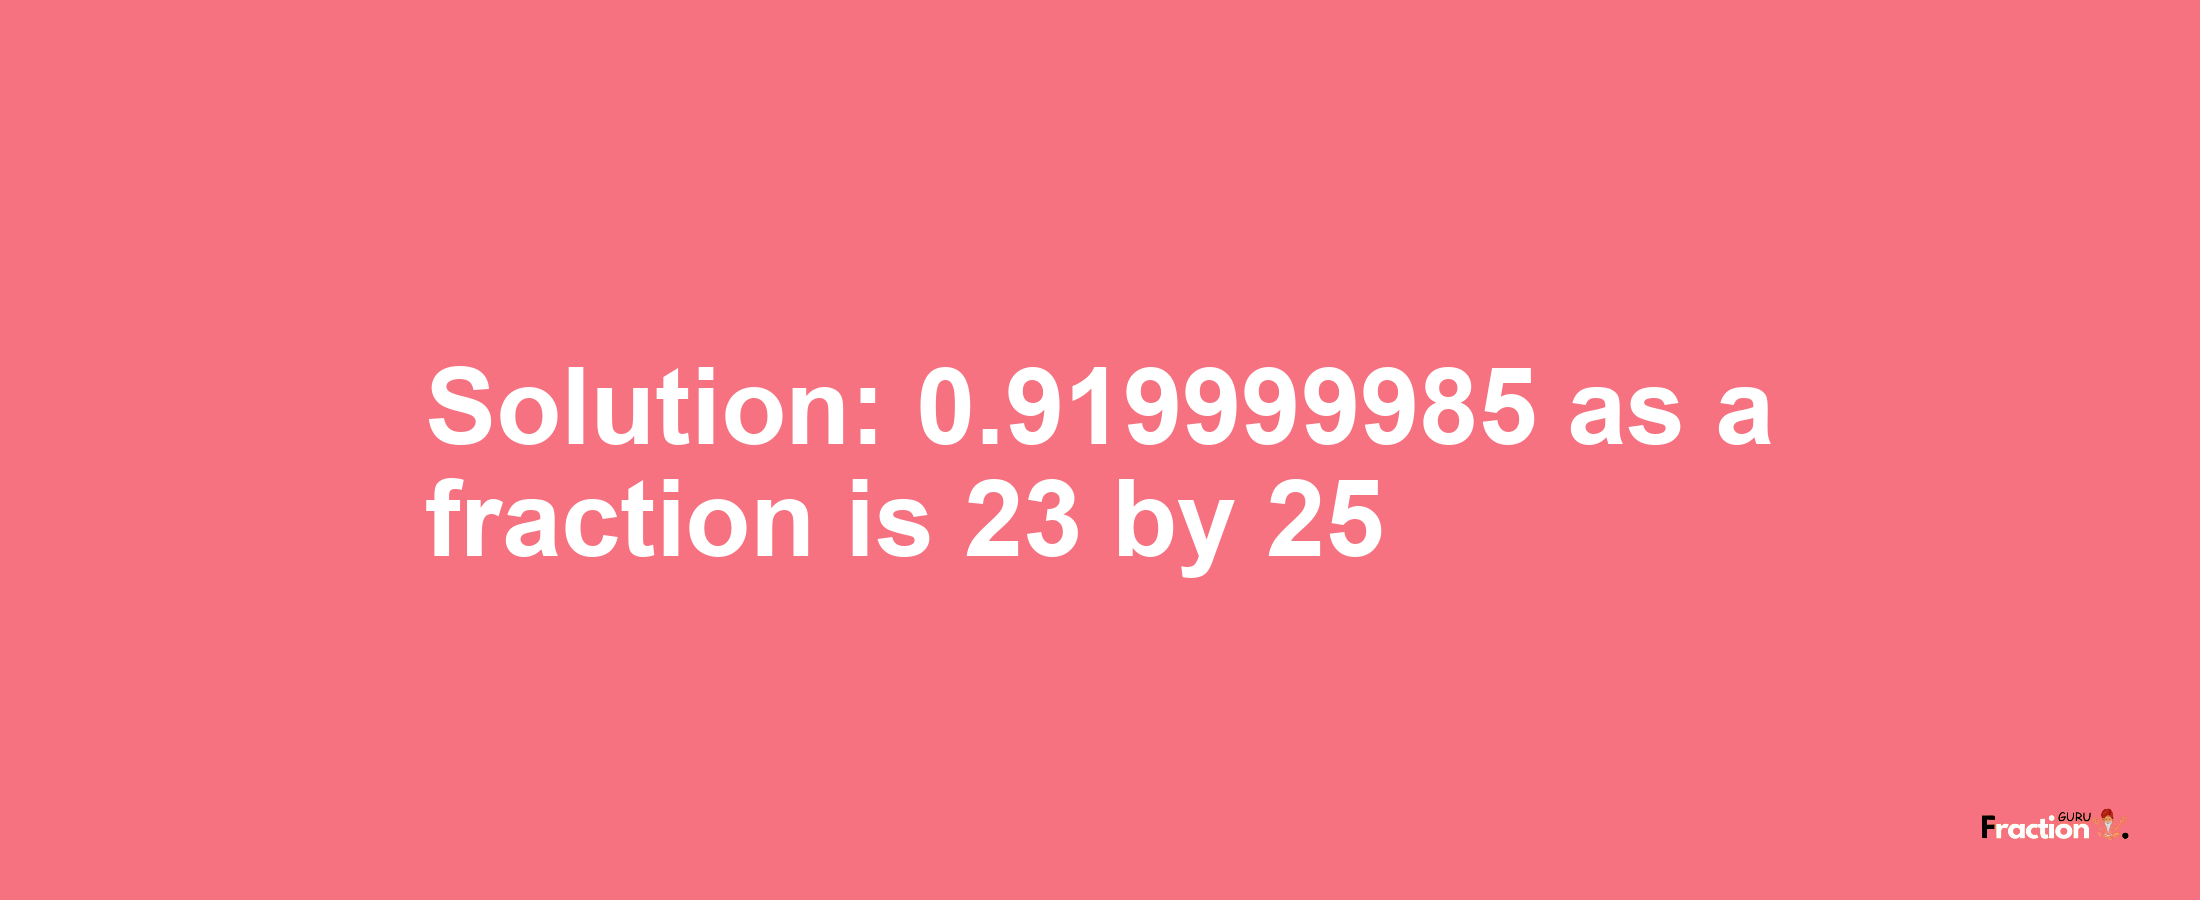 Solution:0.919999985 as a fraction is 23/25